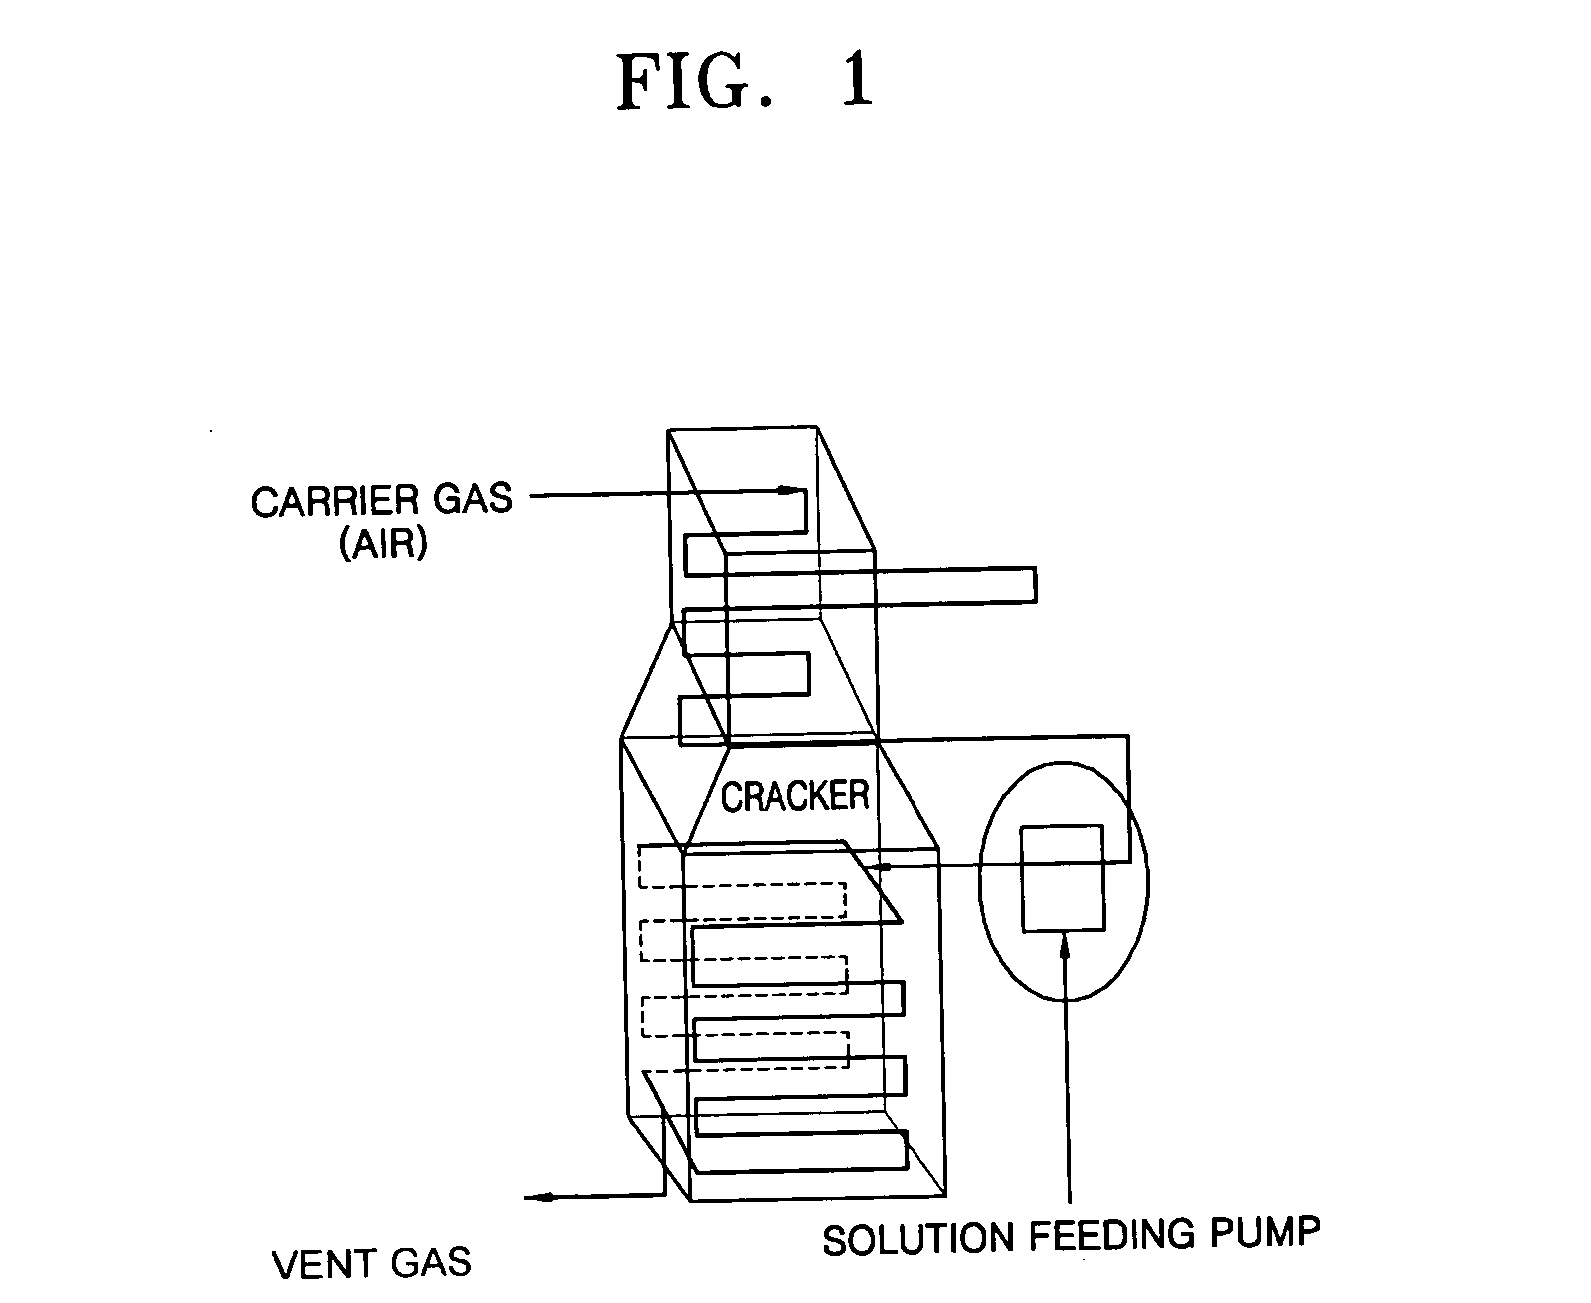 Coating film for inhibiting coke formation in ethylene dichloride pyrolysis cracker and method of producing the same